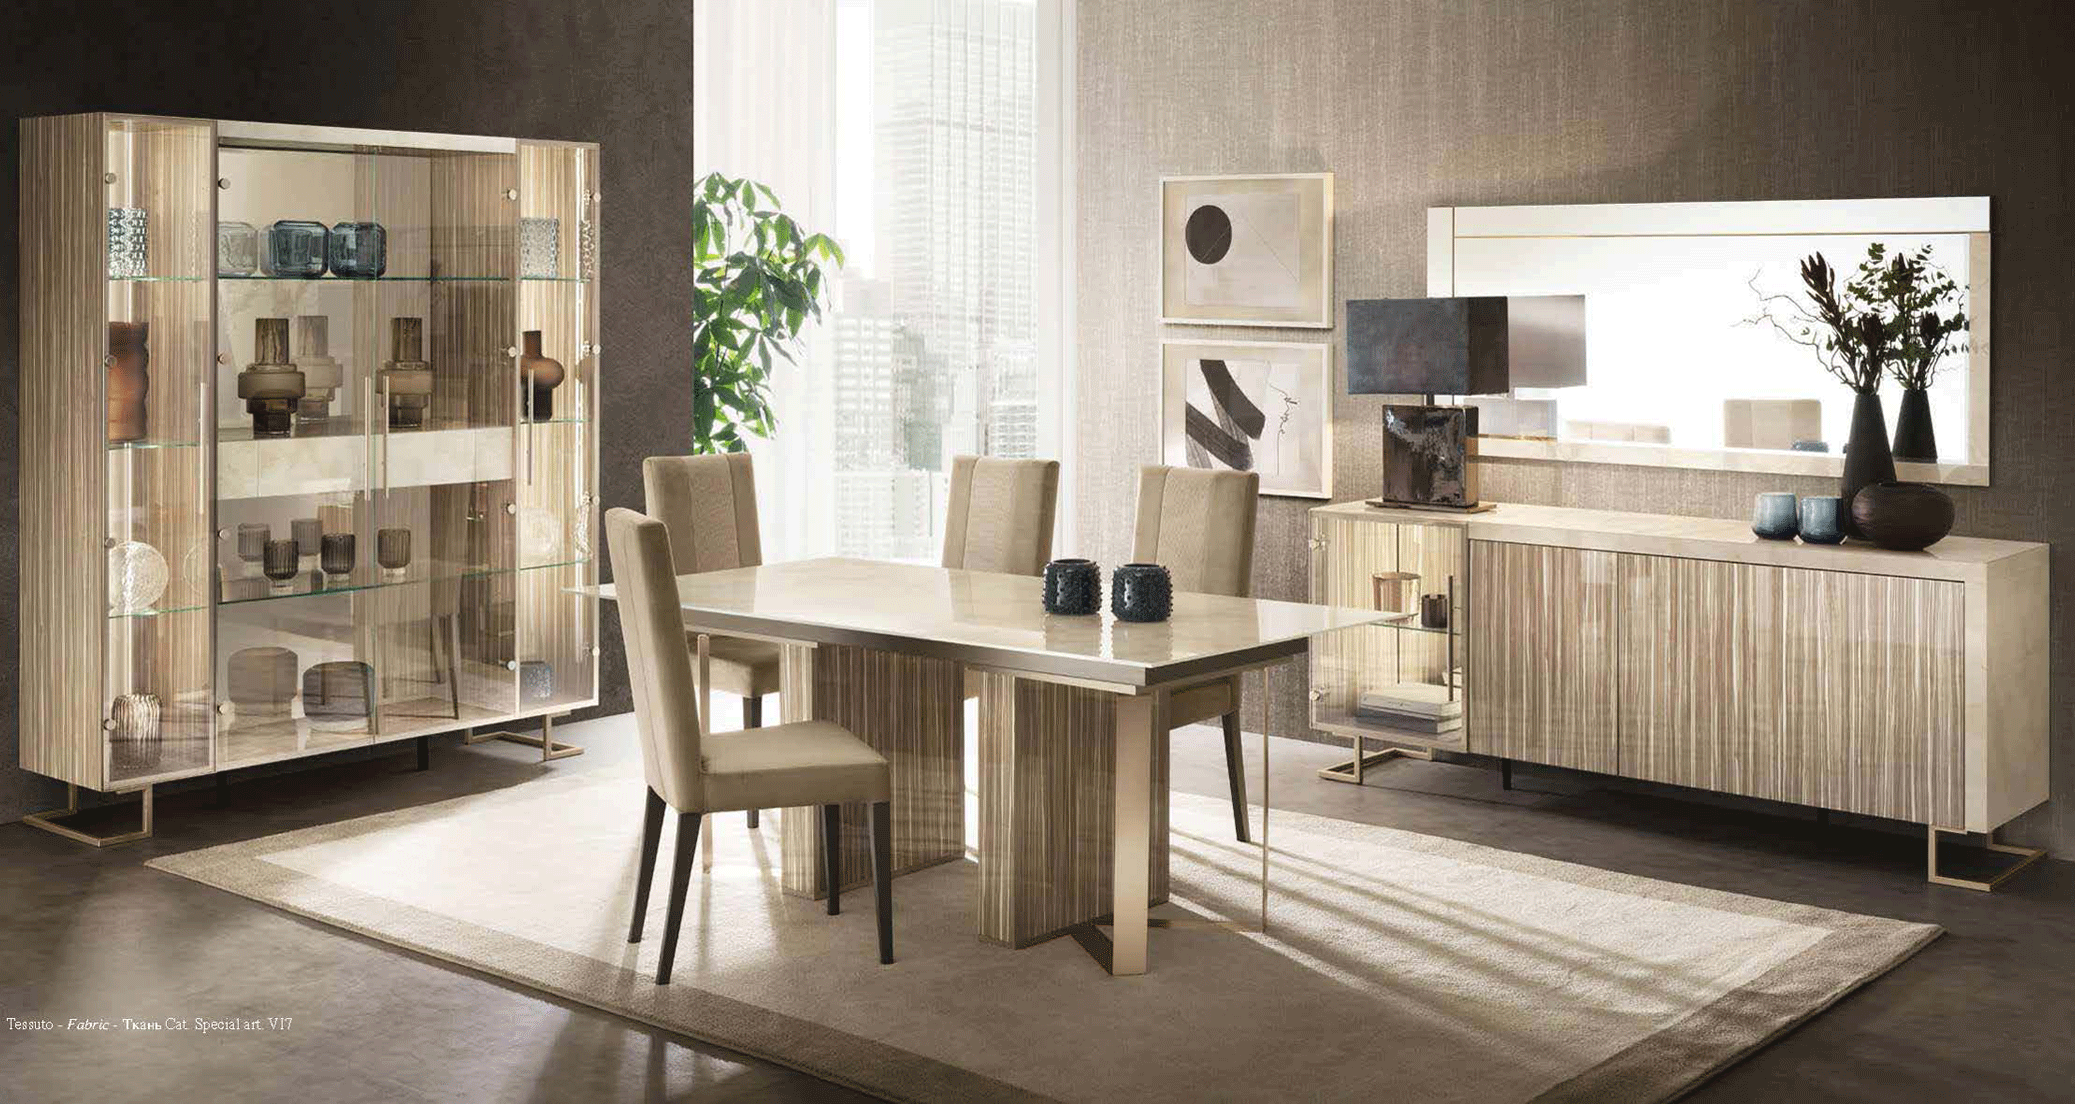 Wallunits Hallway Console tables and Mirrors Luce Light Dining Additional Items